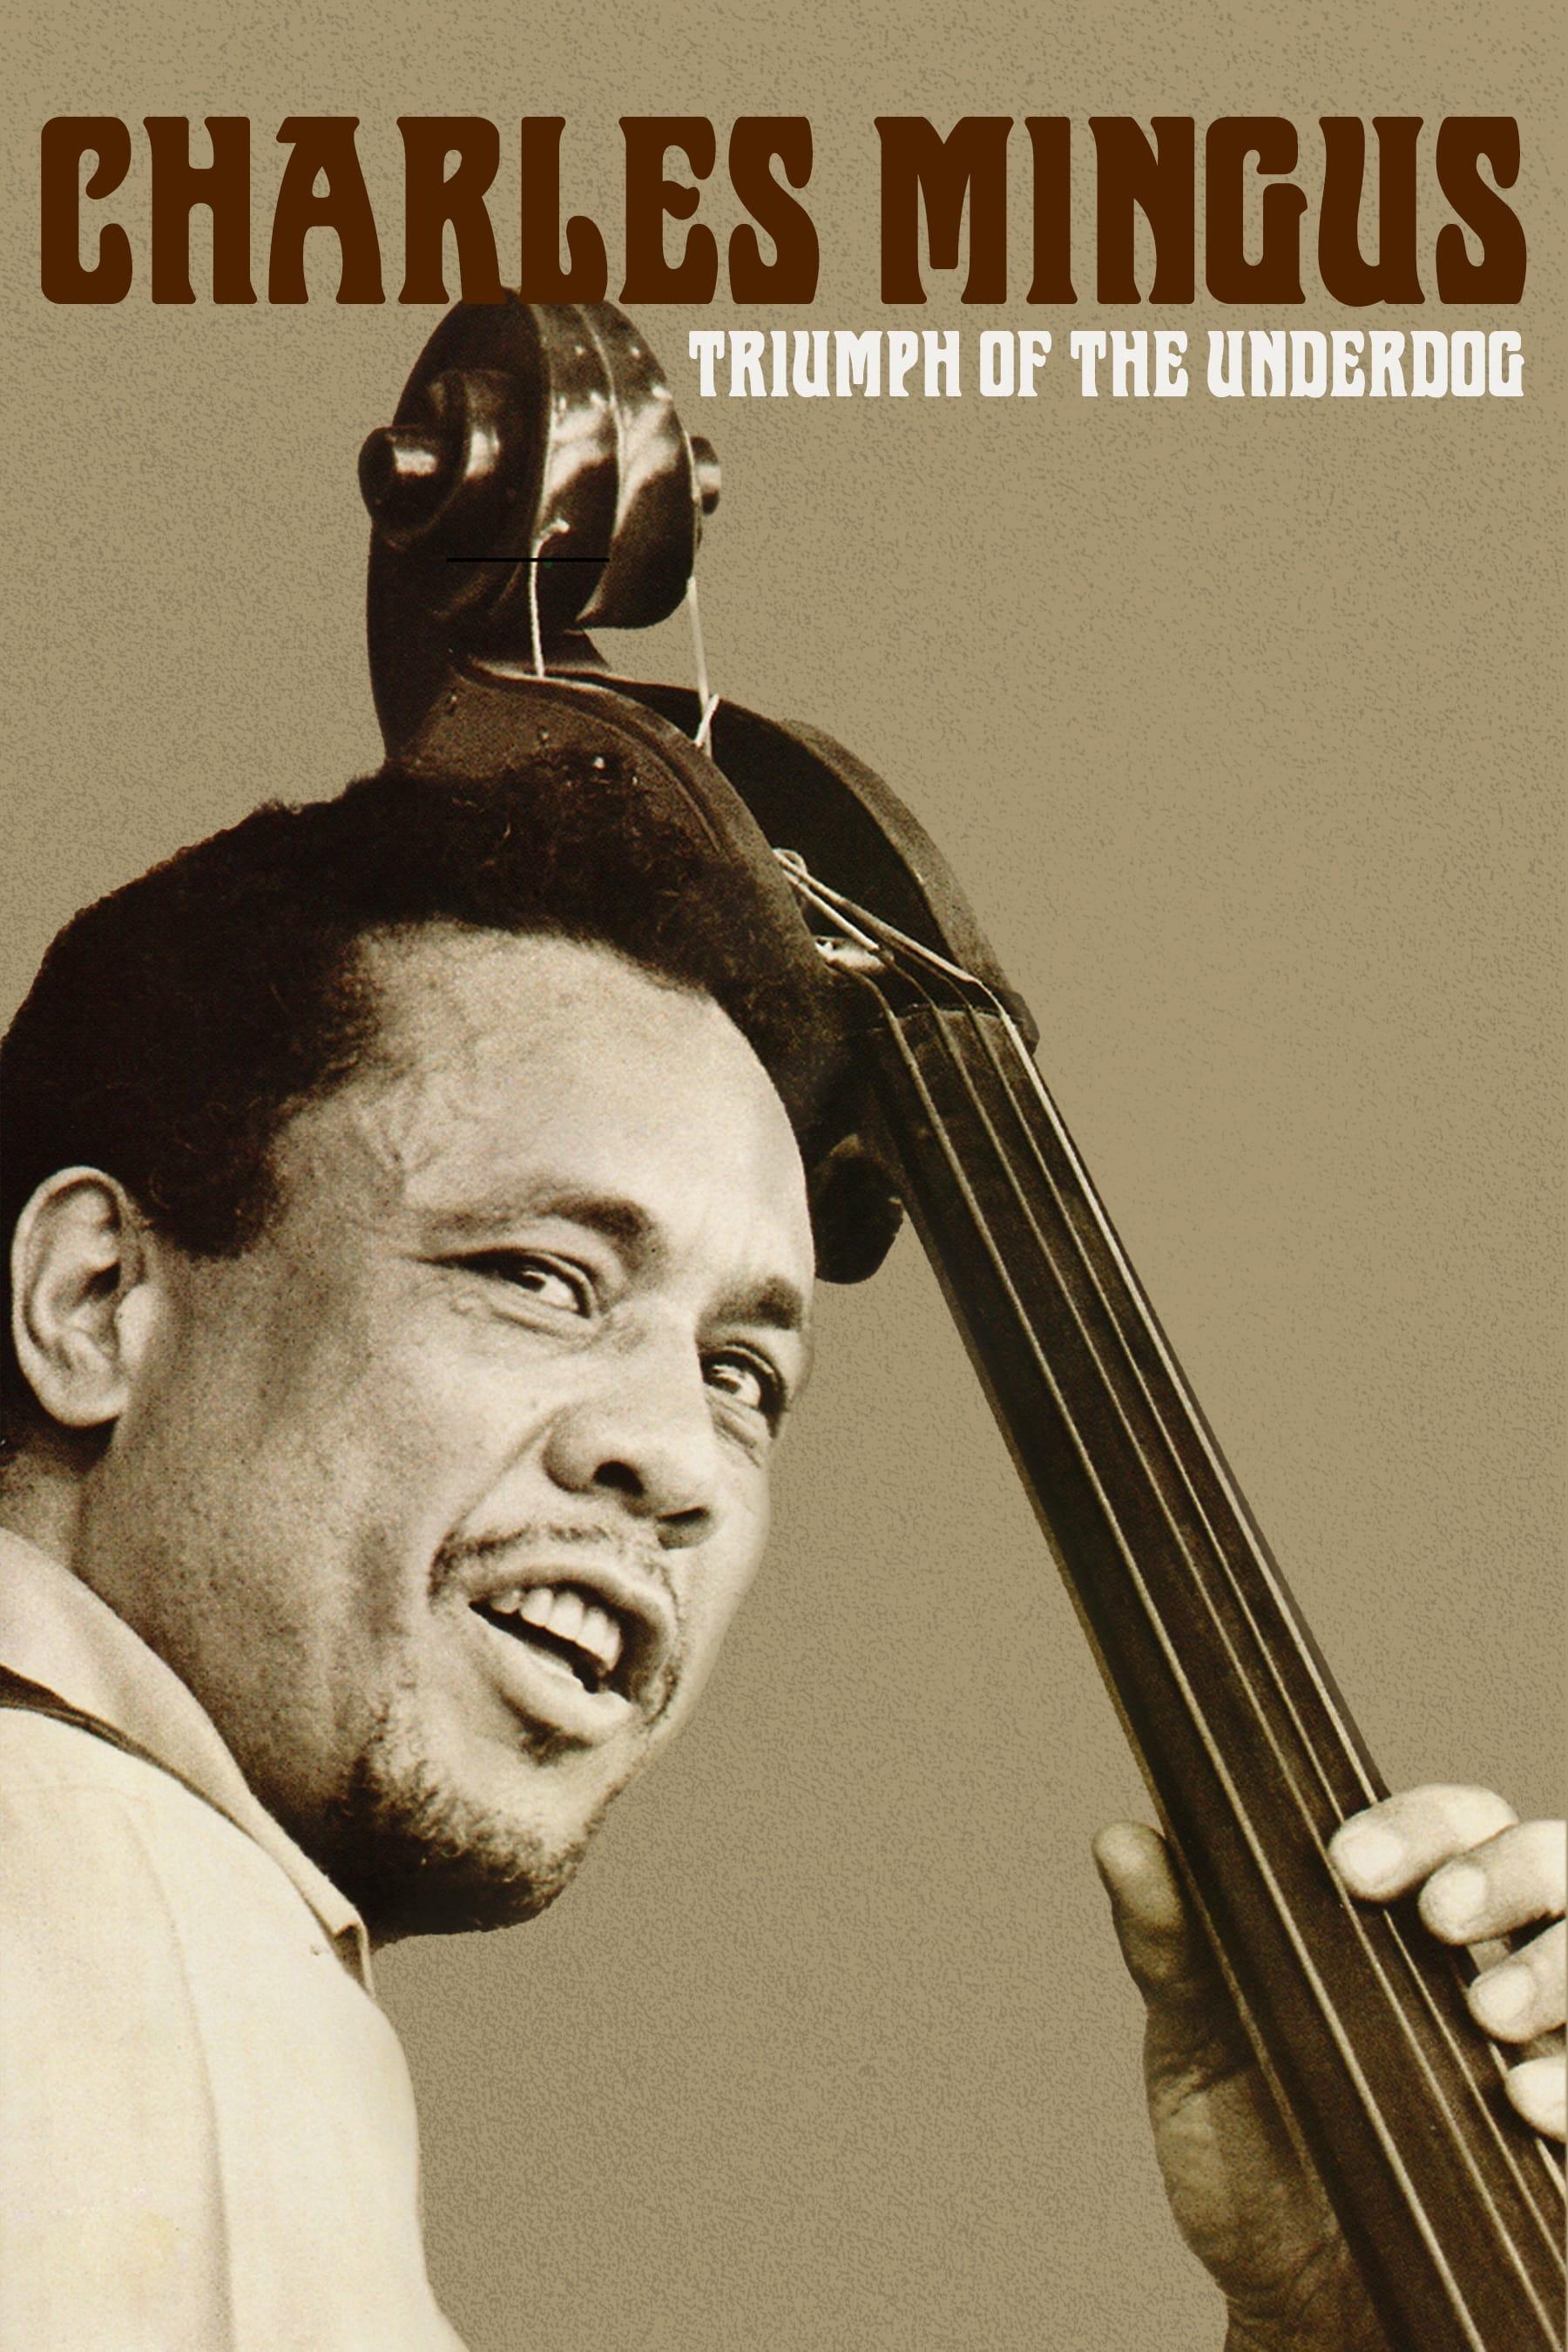 Charles Mingus: Triumph of the Underdog poster